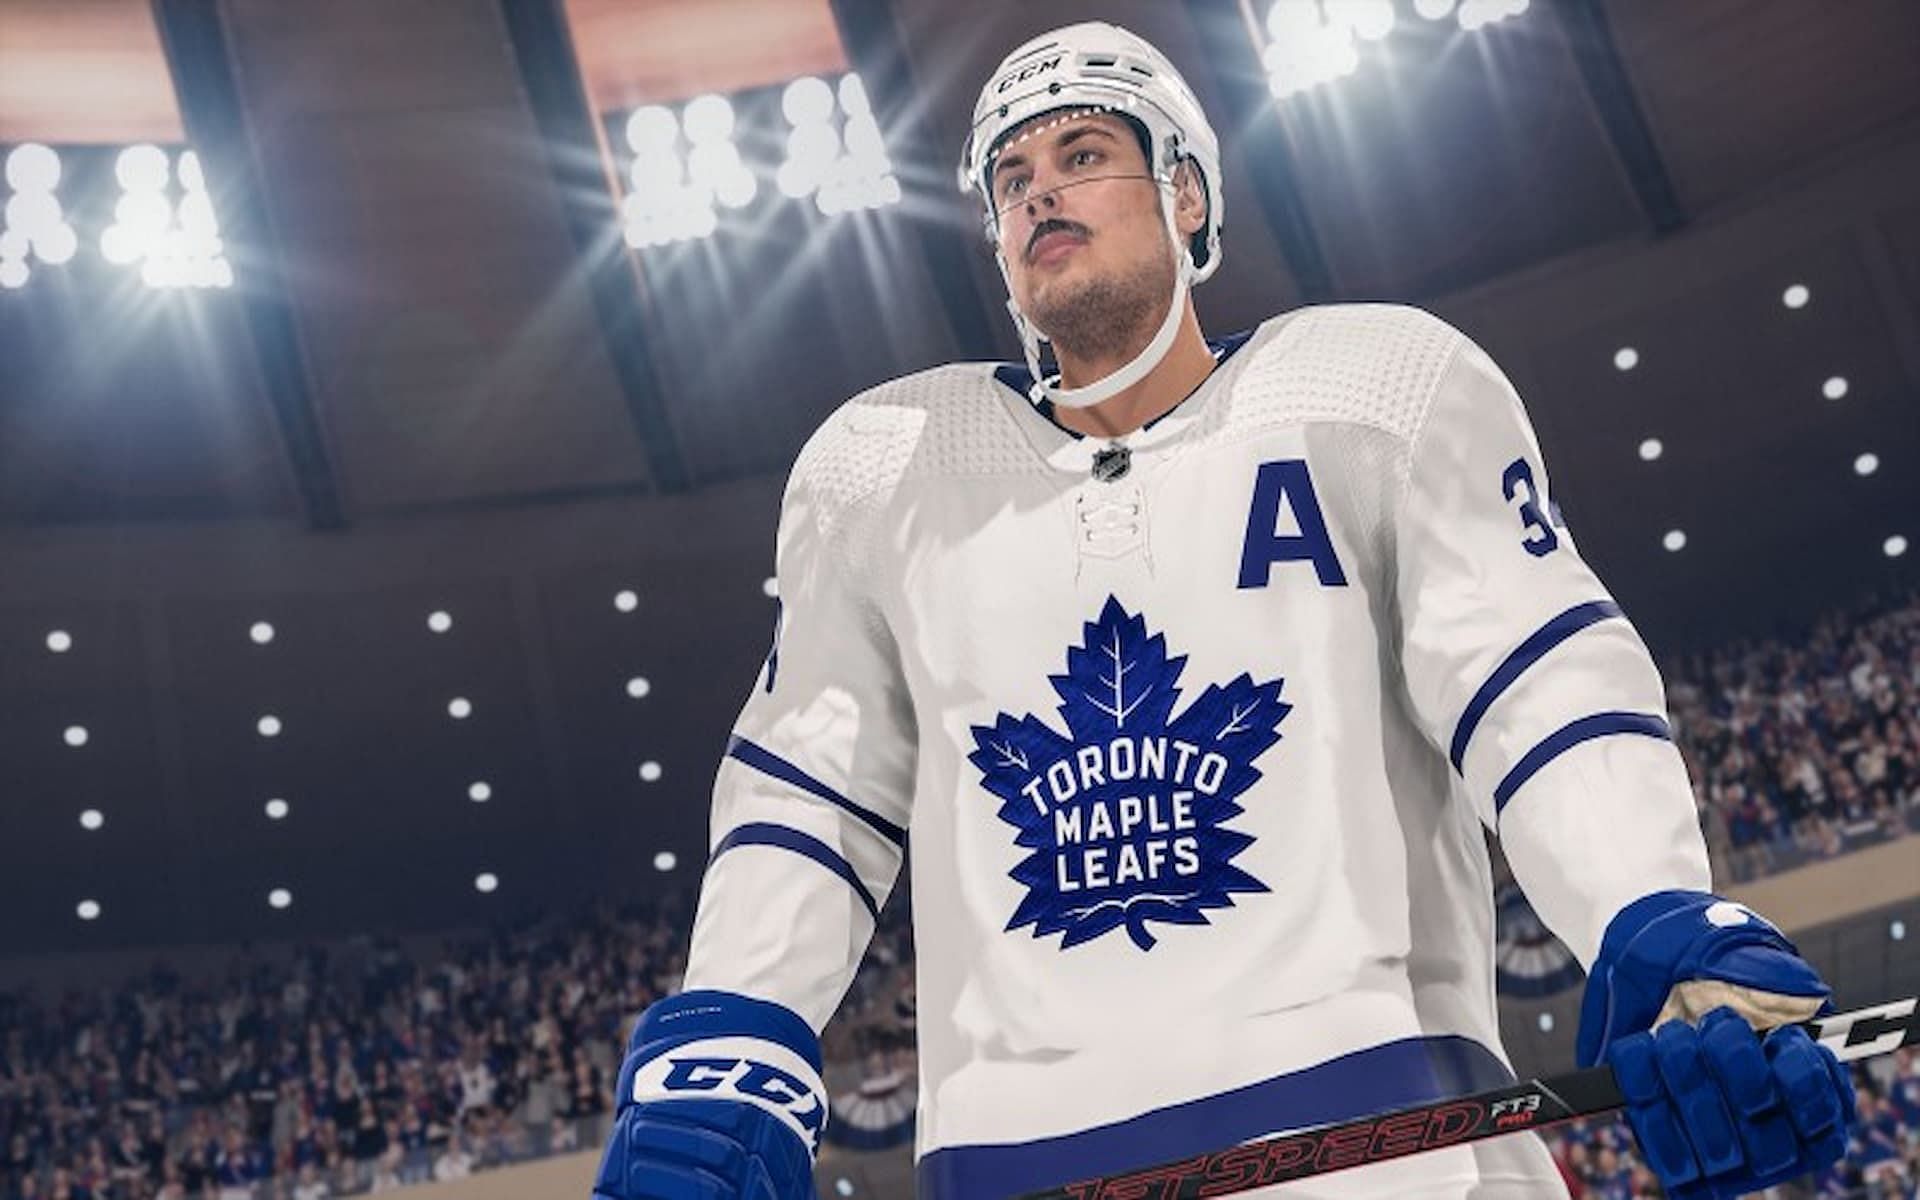 A Toronto Maple Leafs player in NHL 22. (Image via EA Sports)